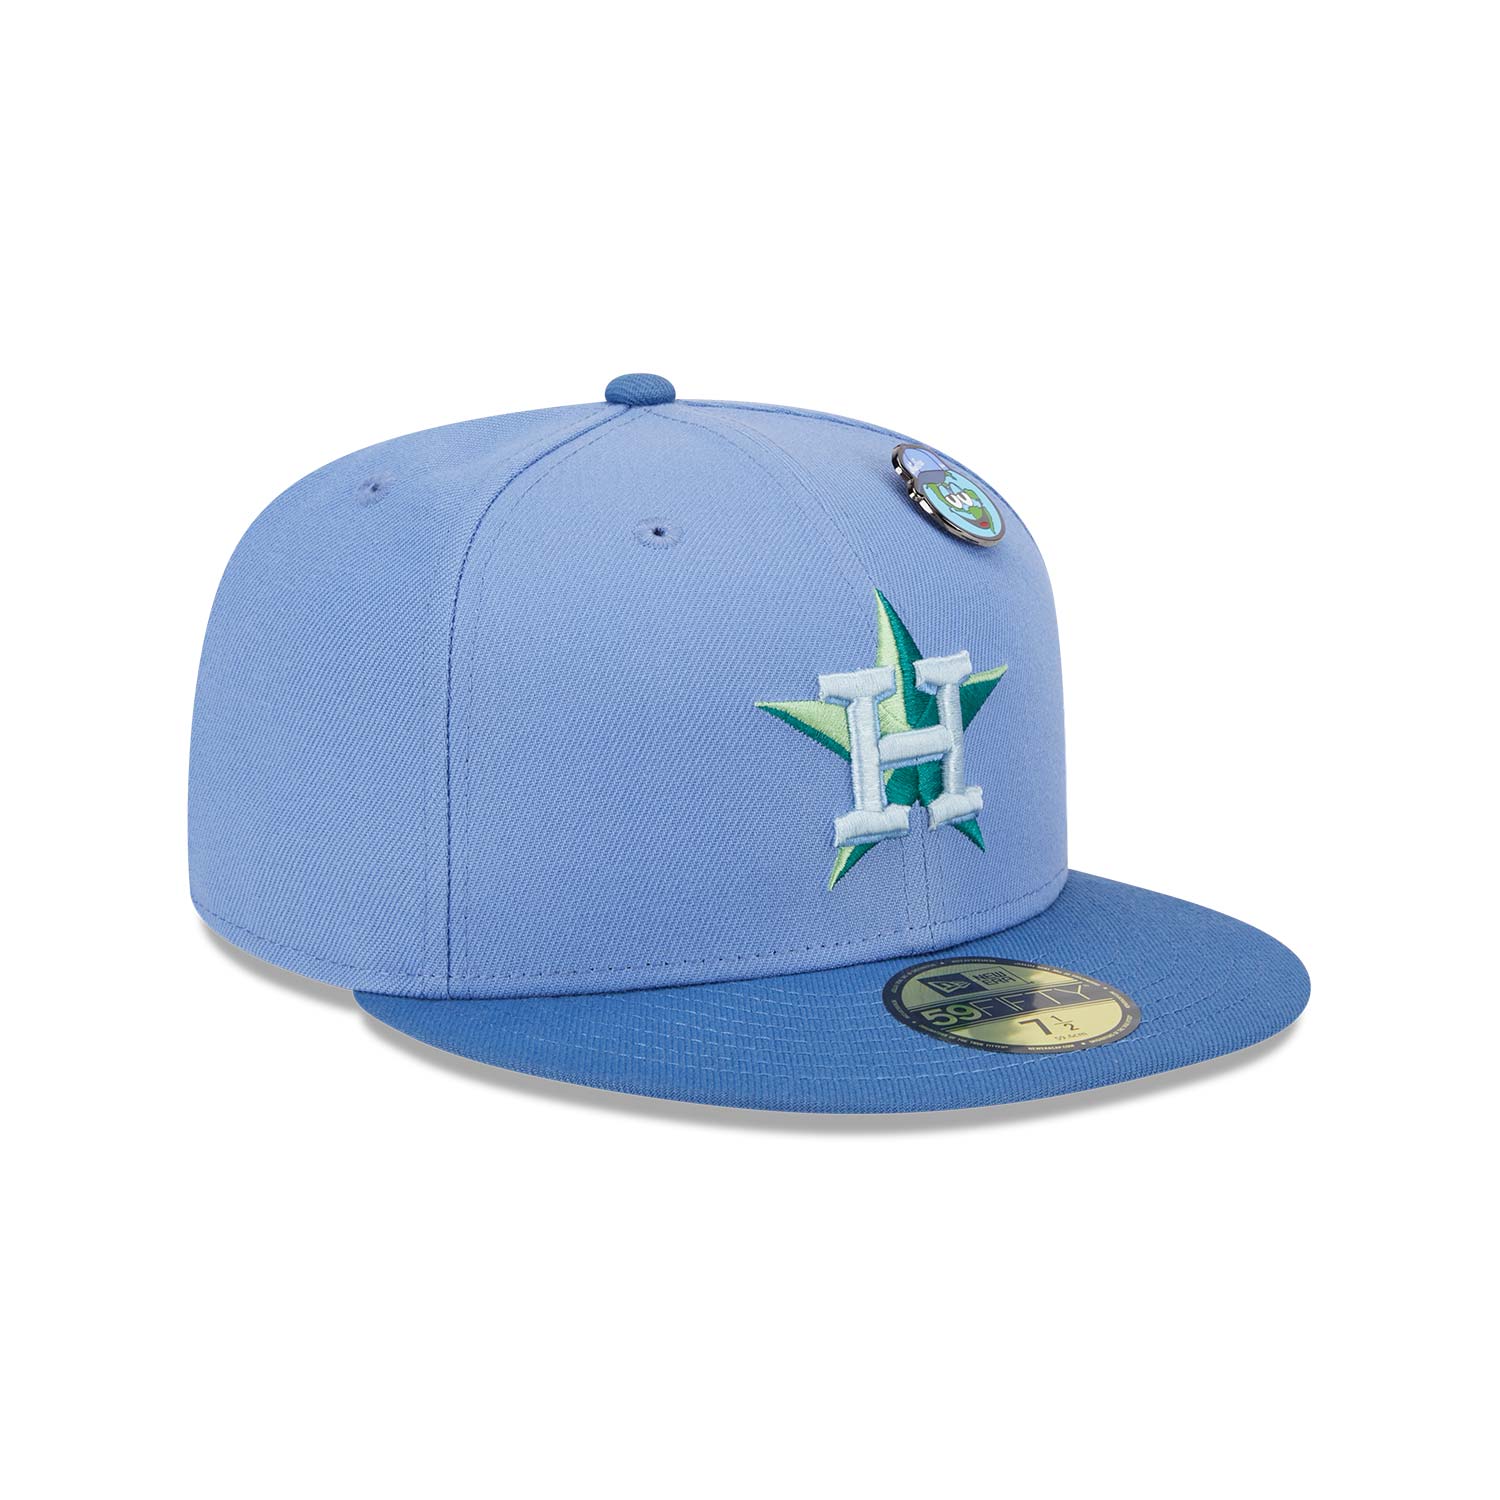 Houston Astros Outer Space Blue 59FIFTY Fitted Cap